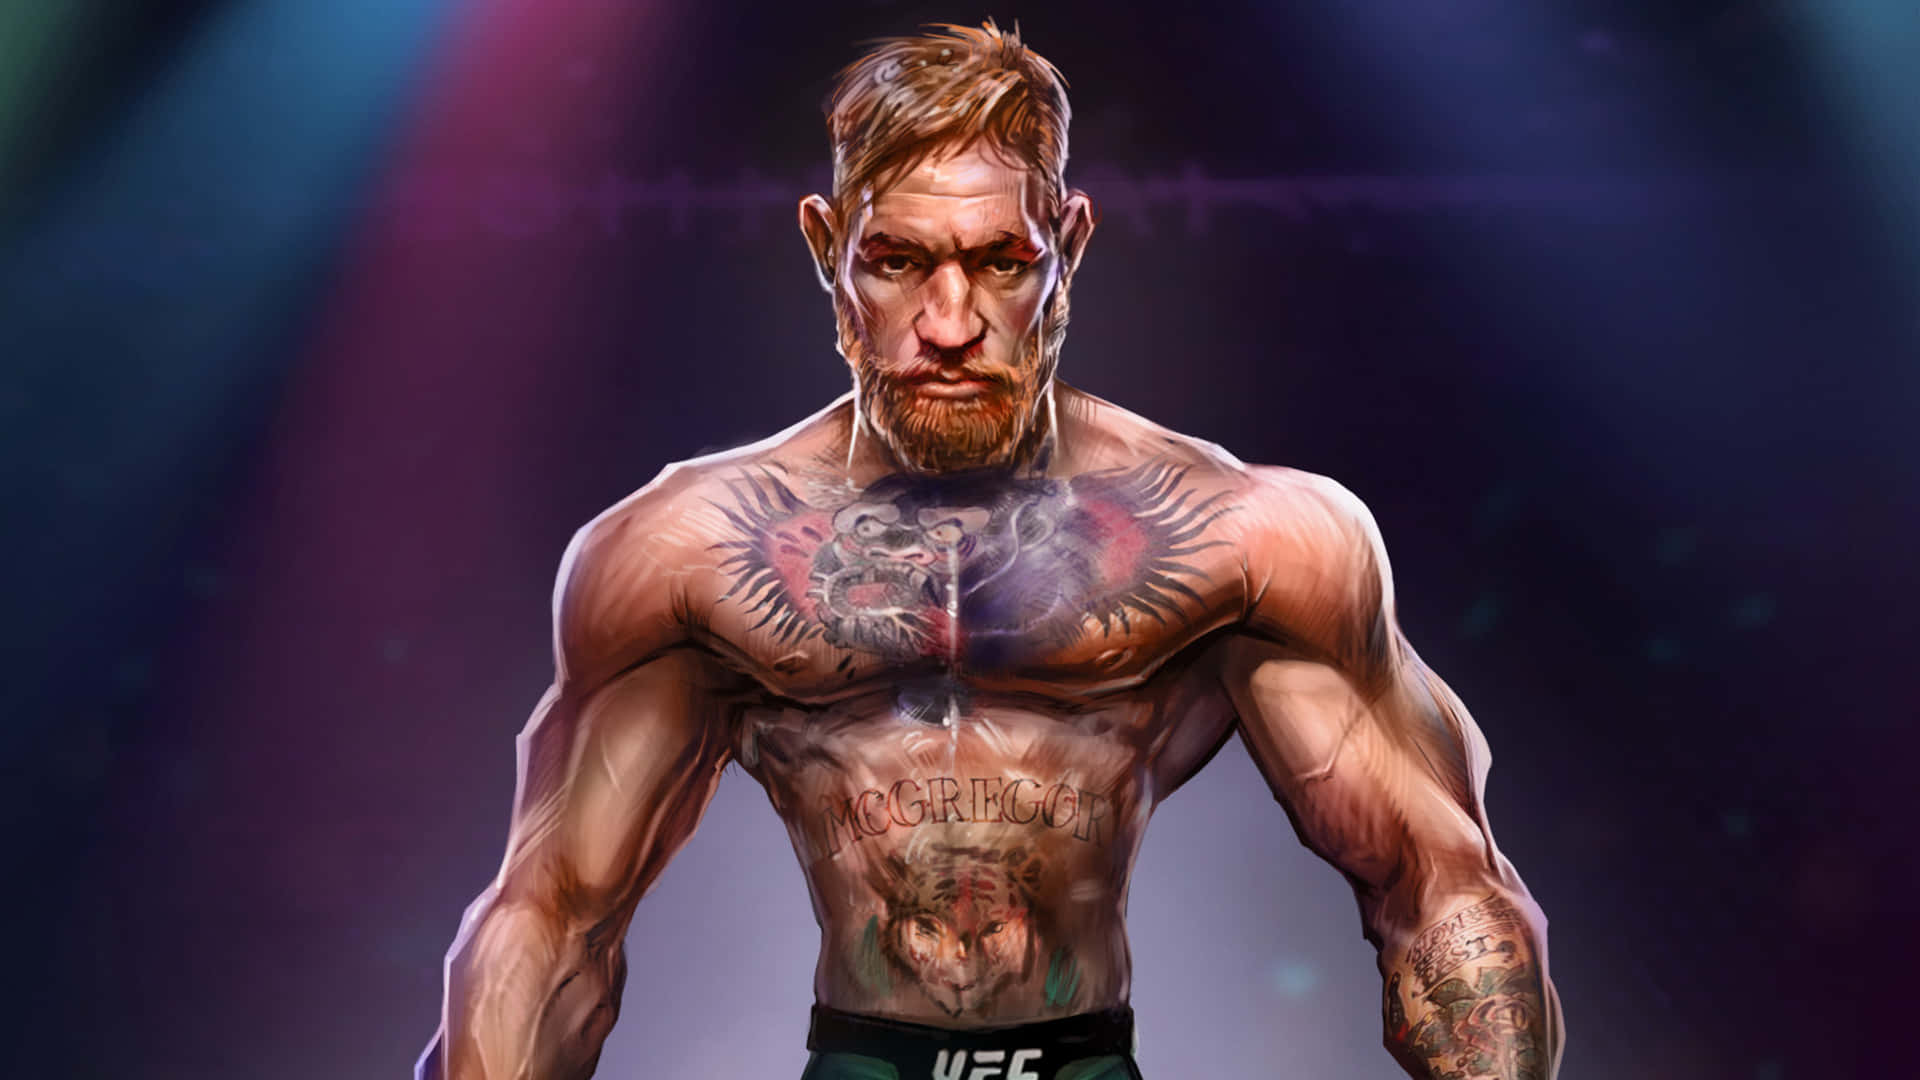 "Conor McGregor doubles-down on his commitment to MMA"